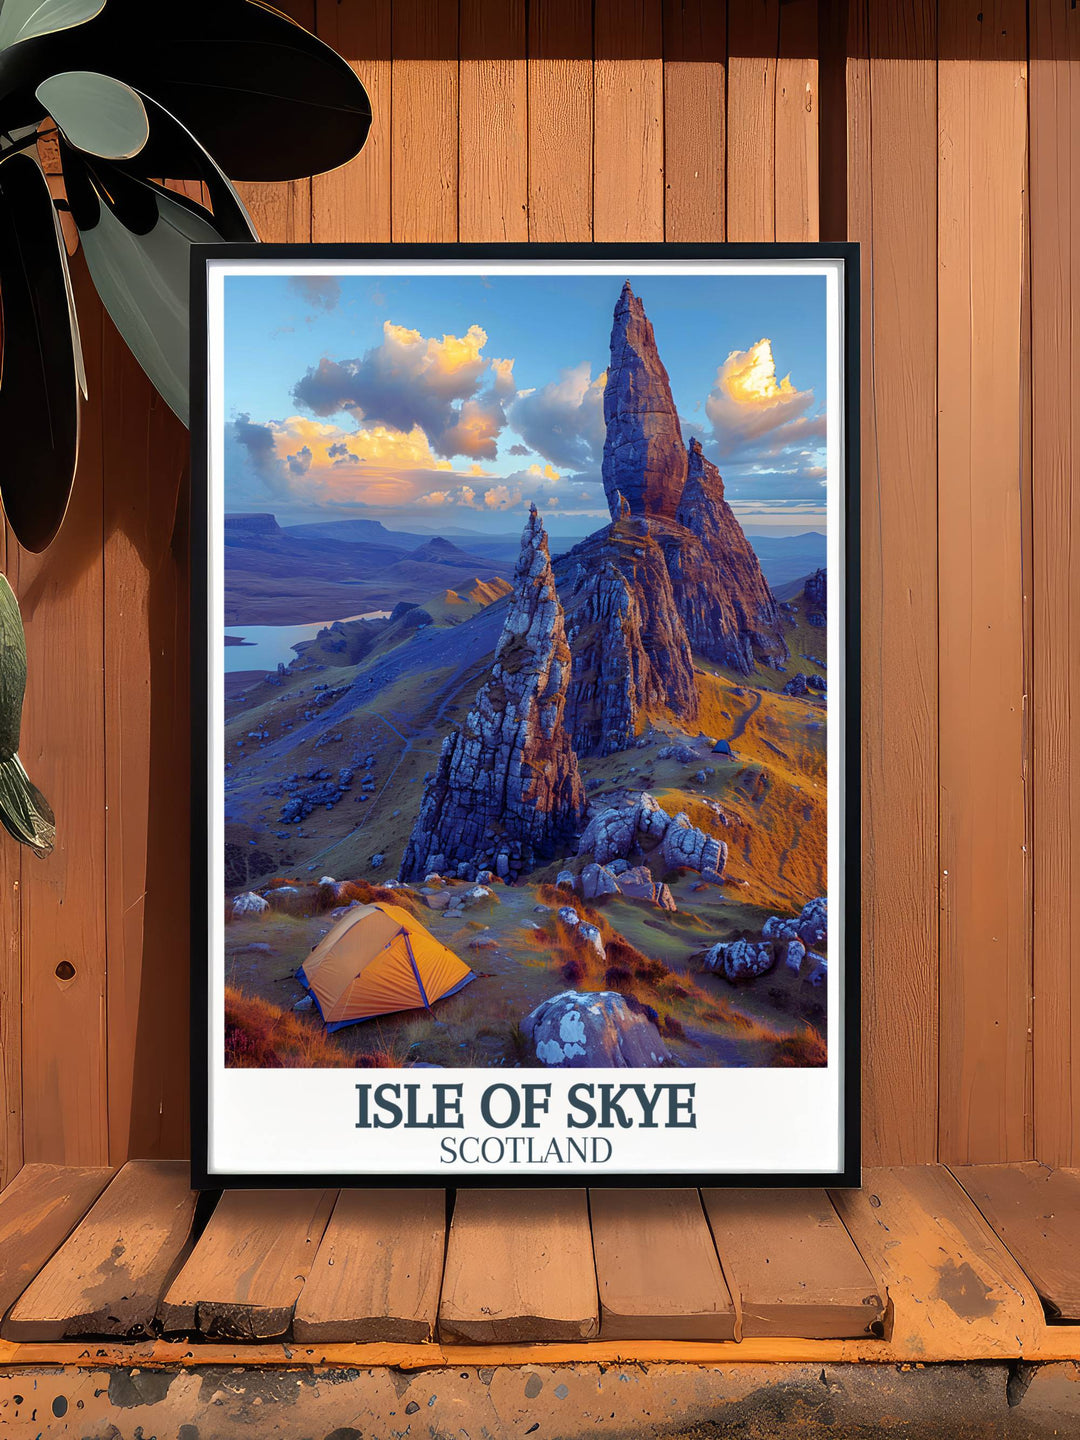 Artistic Scotland Wall Art capturing the essence of Scottish nature, a sophisticated addition to any home or office decor.